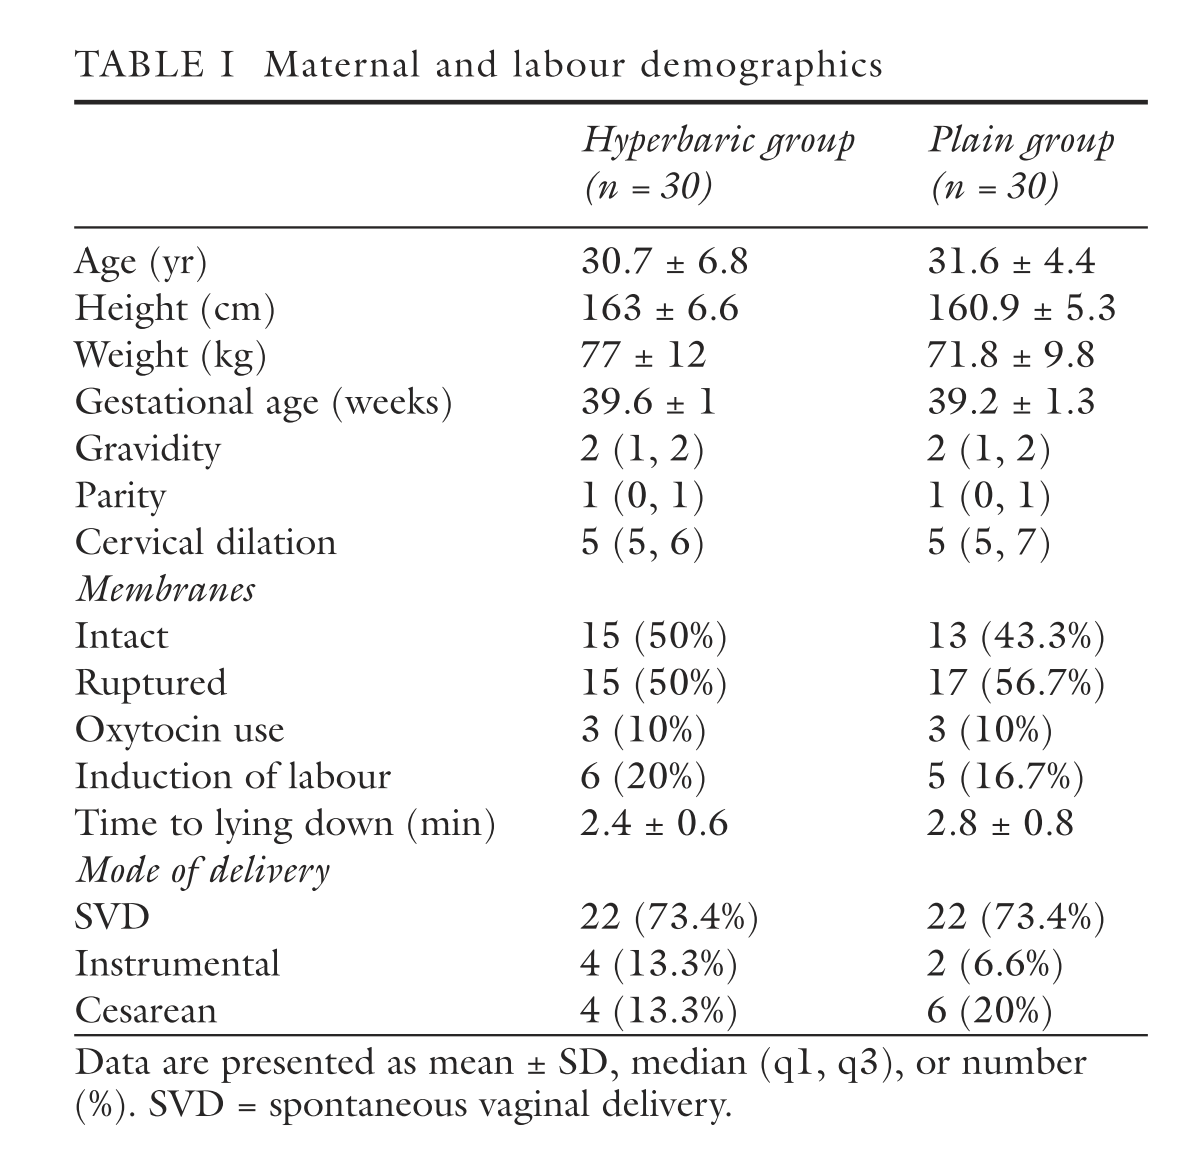 Rafaeel randomized 62 women in labour to receive 2.5mg of either hyperbaric or plain bupiv both combined with 15µg of fentanyl as CSE. Primary outcome = failure of satisfactory analgesia within 10min  #MedThread  #Tweetorial  #OBAnes  #IsraelAnes19